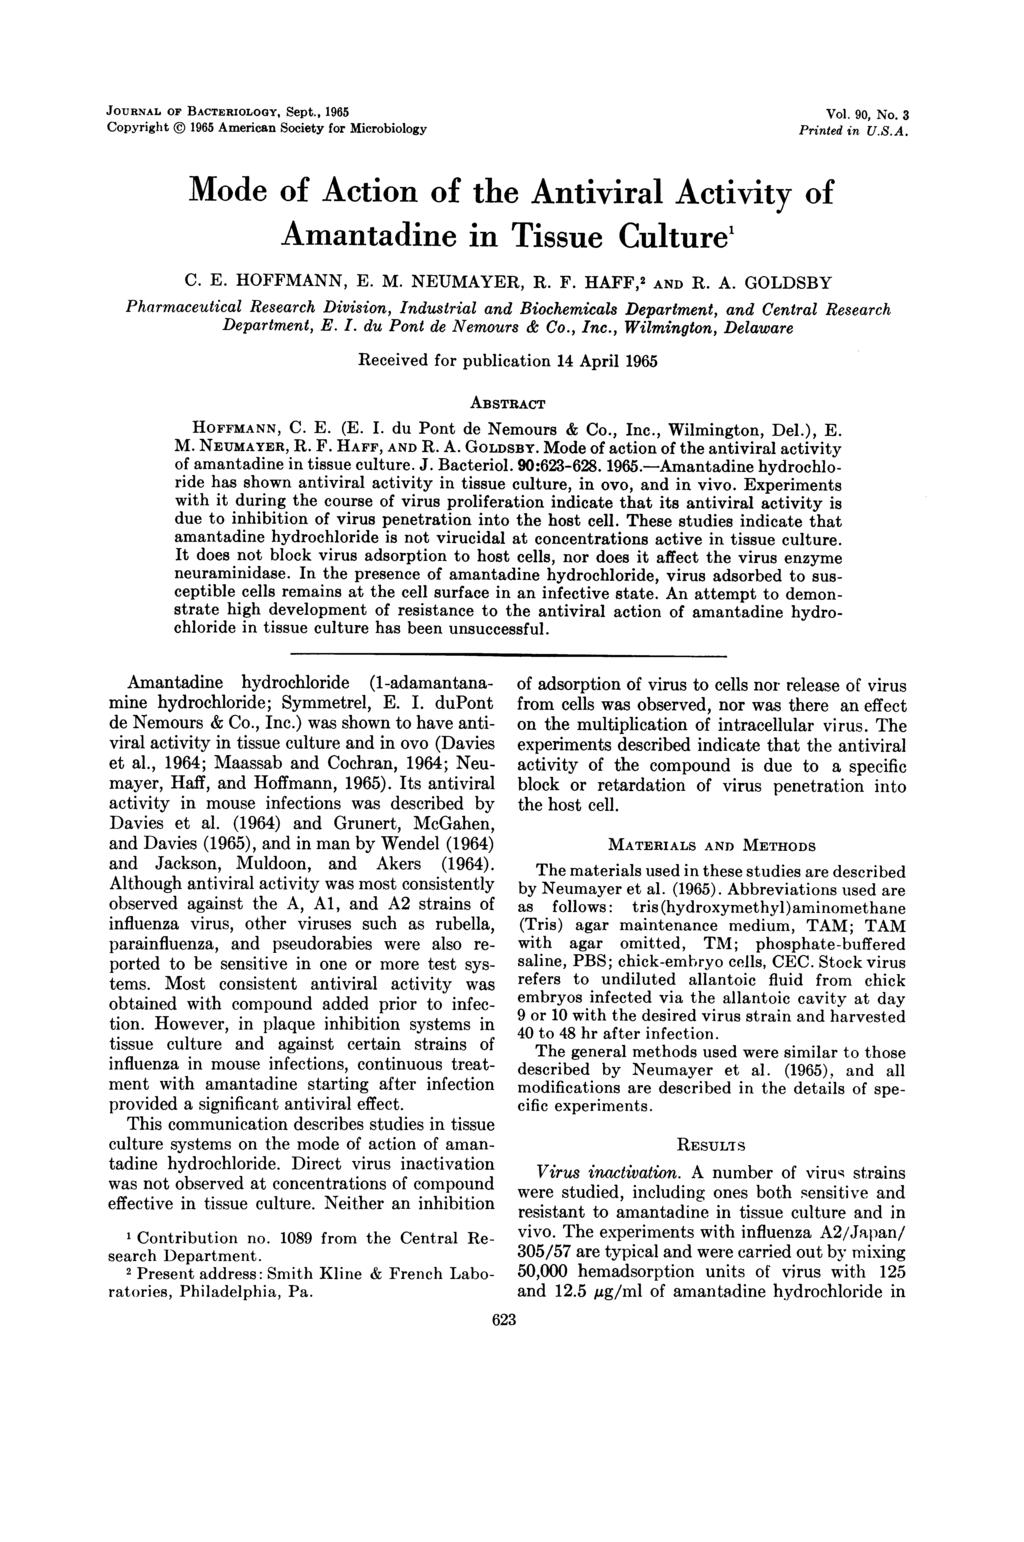 JOURNAL OF BACTERIOLOGY, Sept., 1965 Copyright 1965 American Society for Microbiology Vol. 90, No. 3 Printed in U.S.A. Mode of Action of the Antiviral Activity of Amantadine in Tissue Culture' C. E.